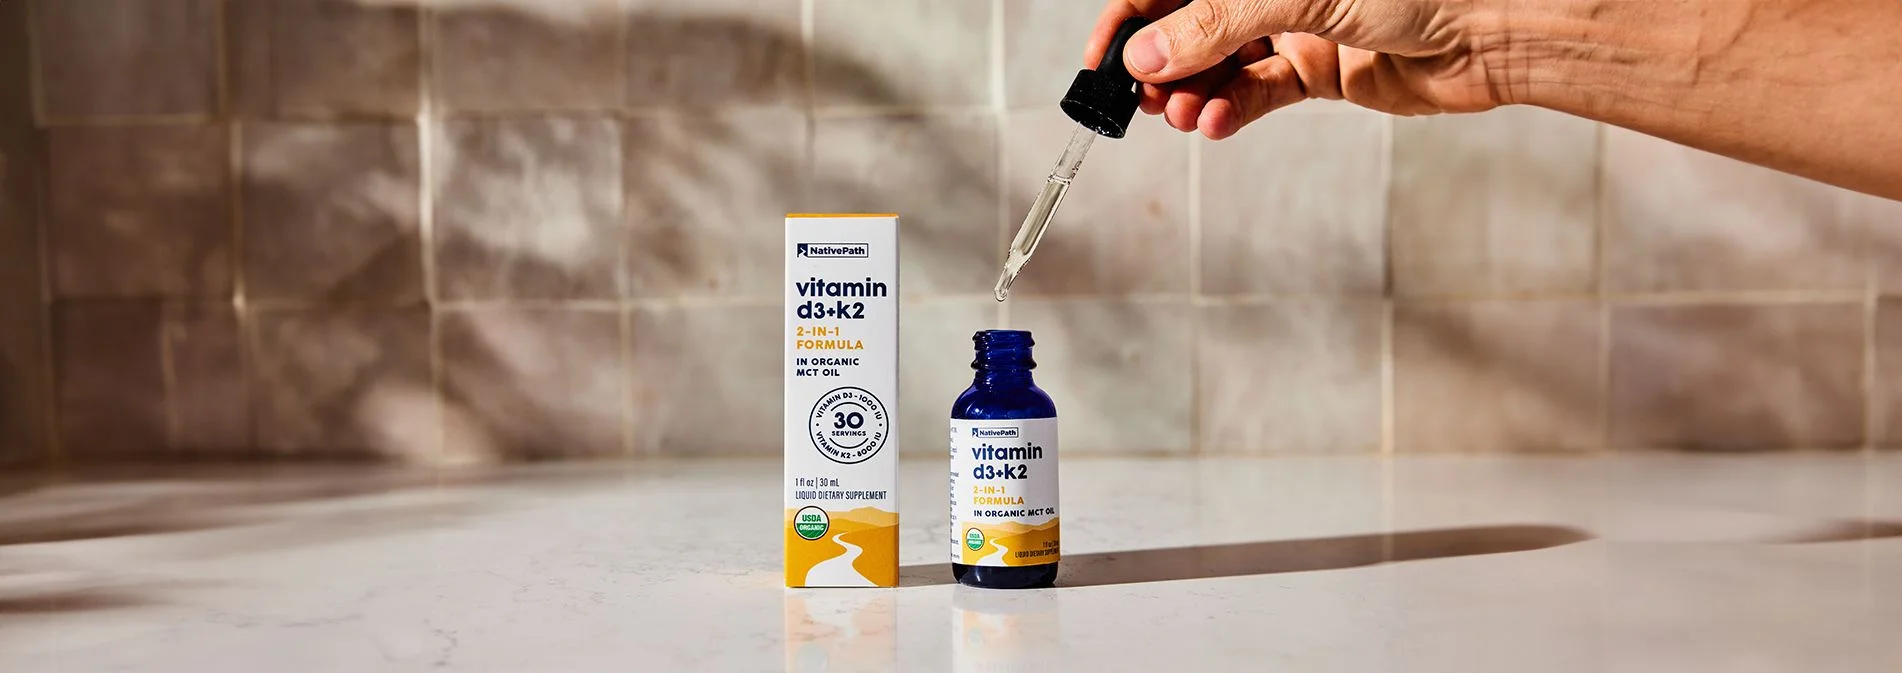 A bottle of NativePath Vitamin D3+K2 tincture with the dropper and packaging on a kitchen counter with a tile background